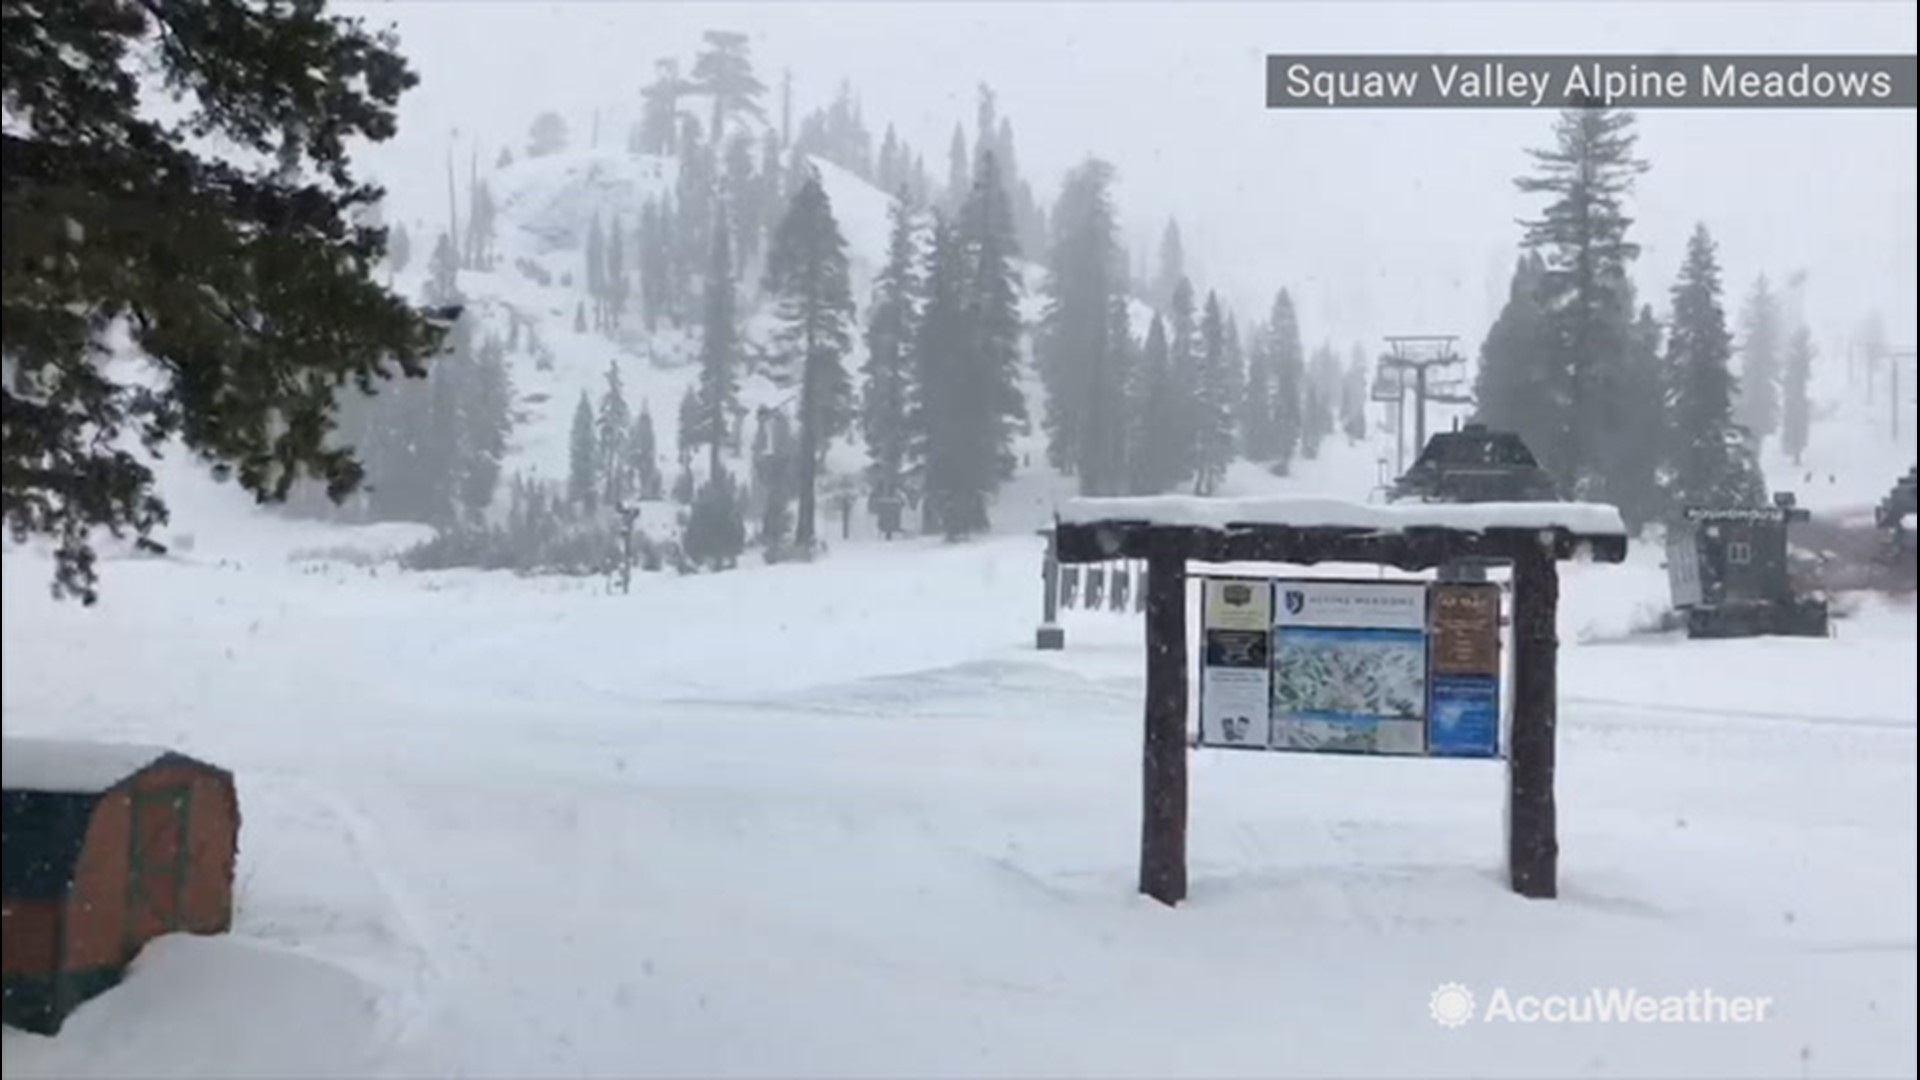 Another storm system moved into the Tahoe region this past weekend giving them 9 inches of snow overnight on the upper mountain at Squaw Valley in California.